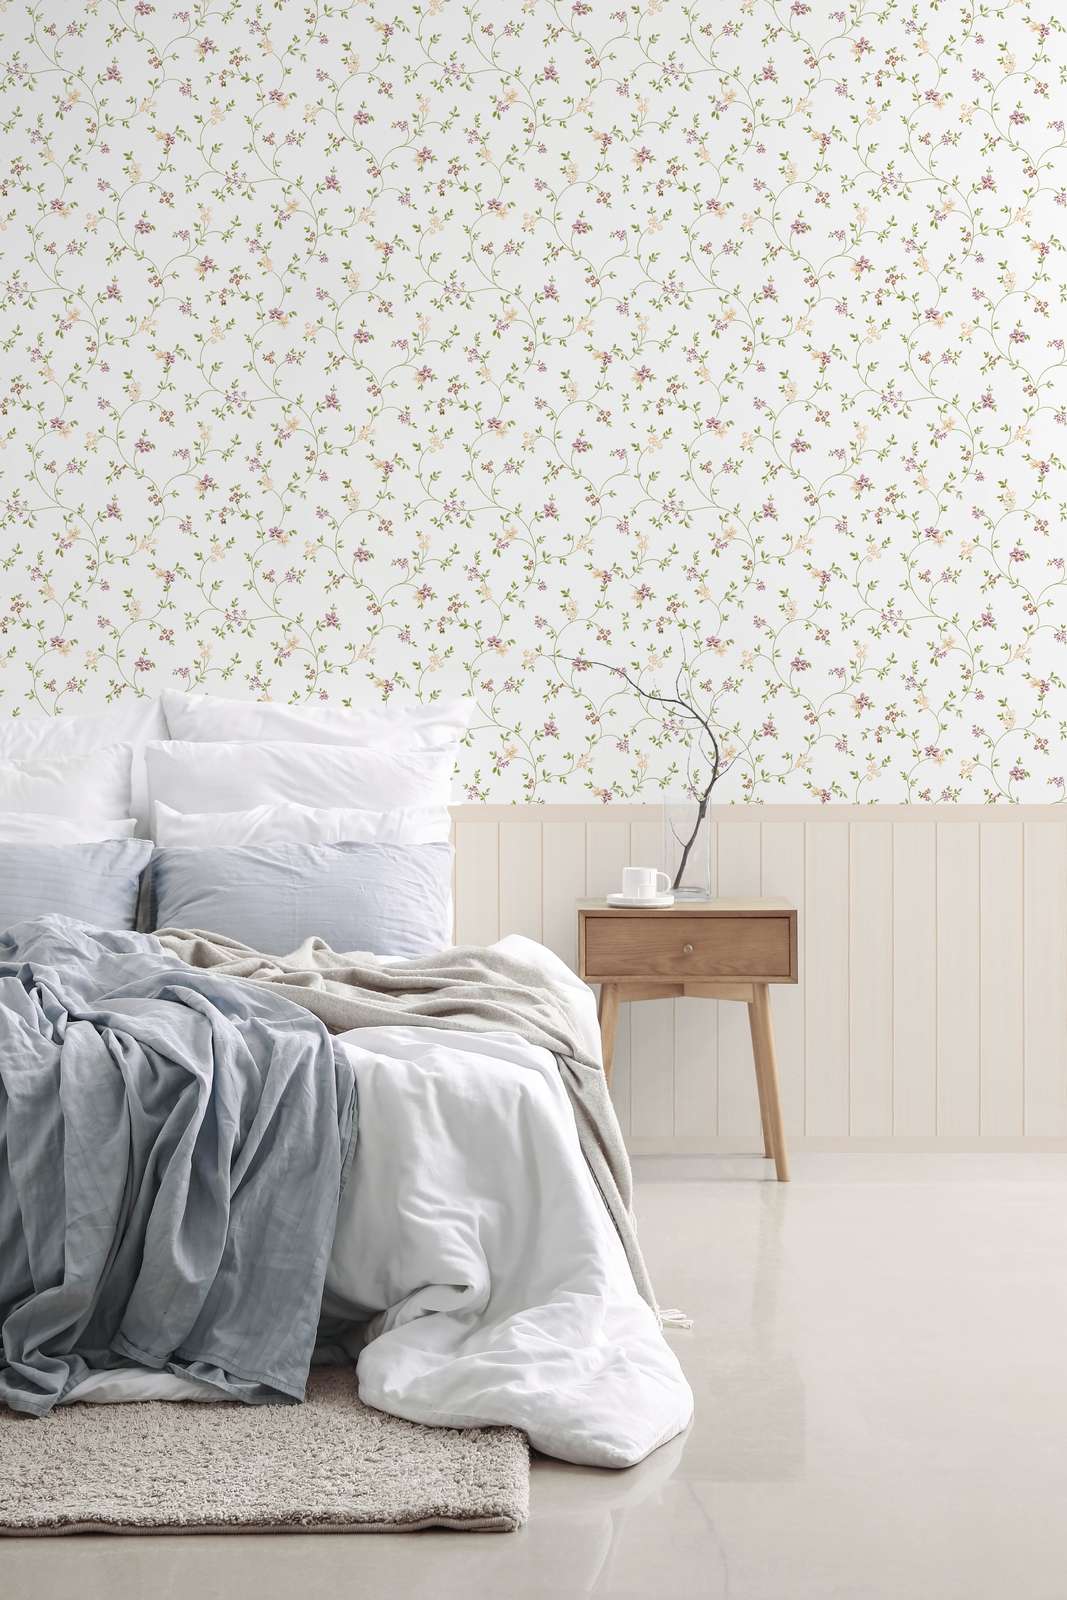             Non-woven motif wallpaper with wood-effect plinth border and floral pattern - beige, white, pink, green
        